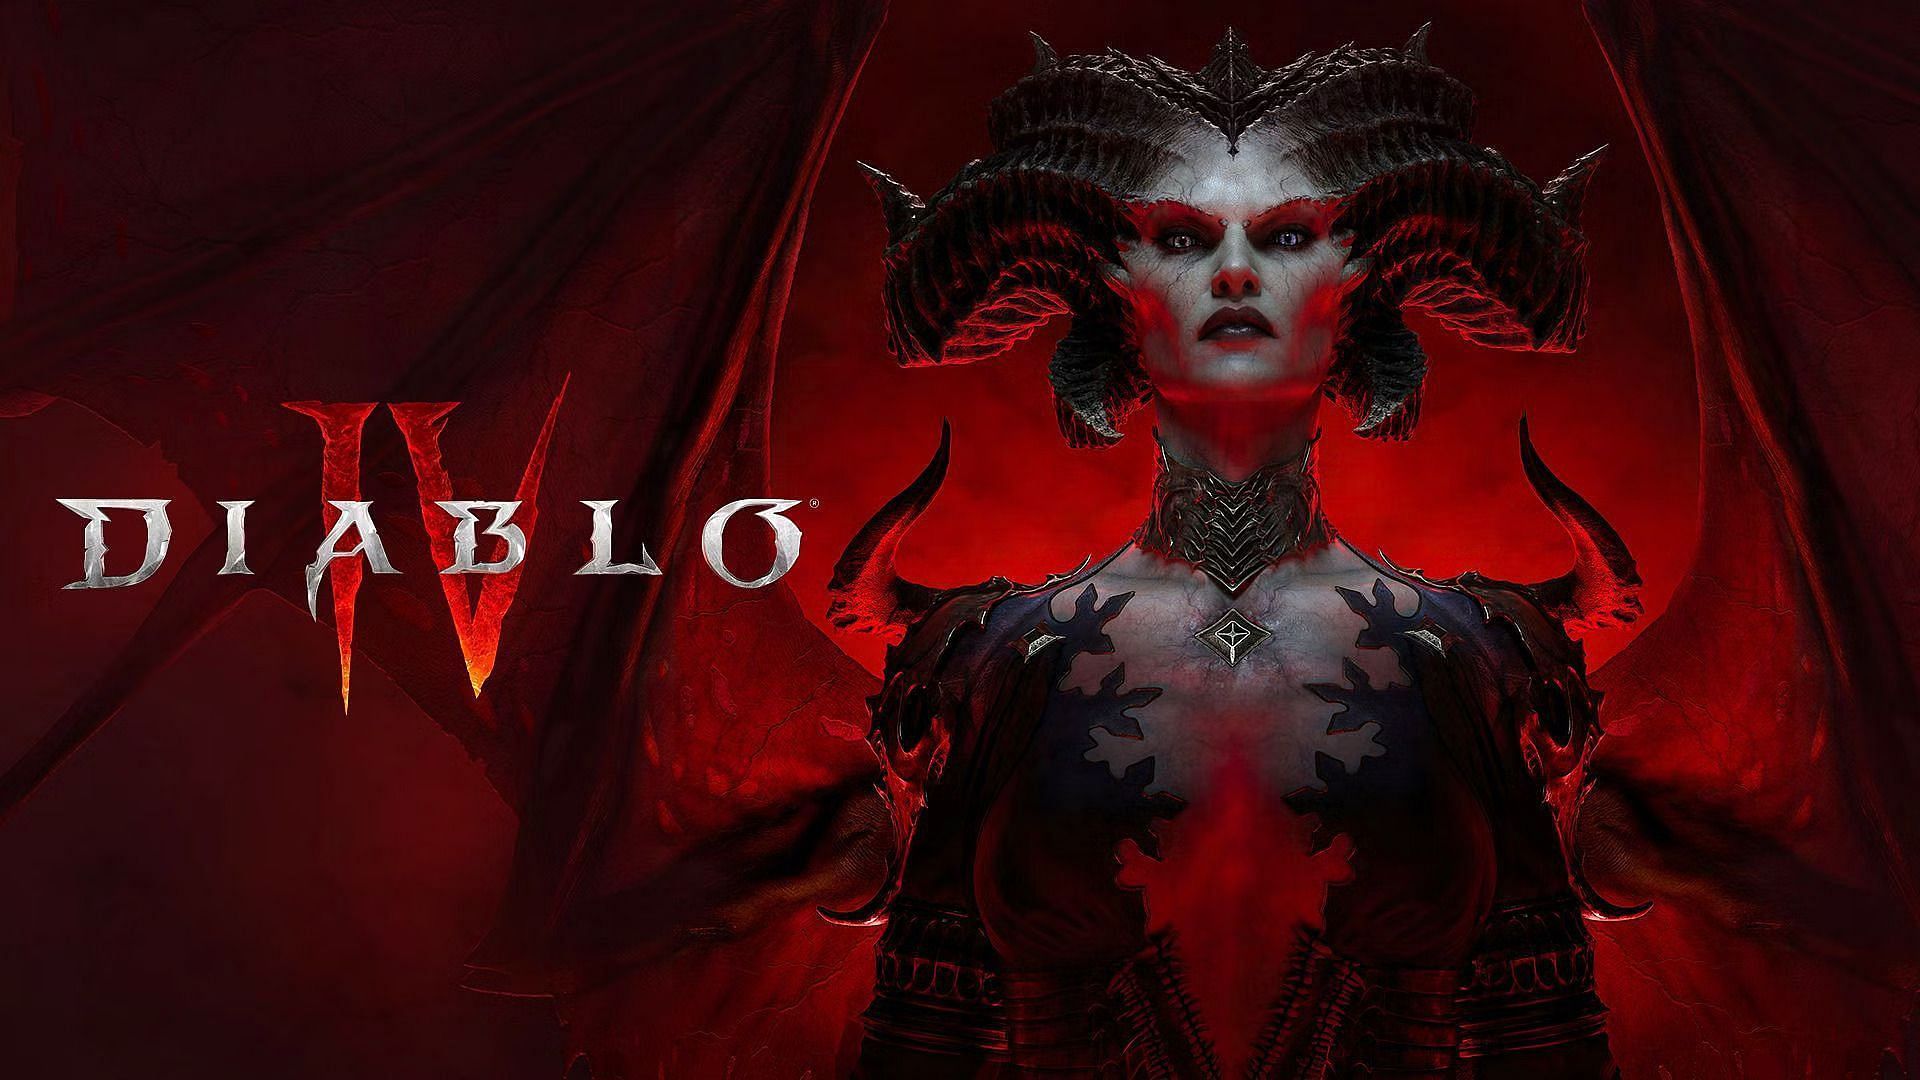 There is no auction house for trading in Diablo 4 (Image via Blizzard Entertainment)